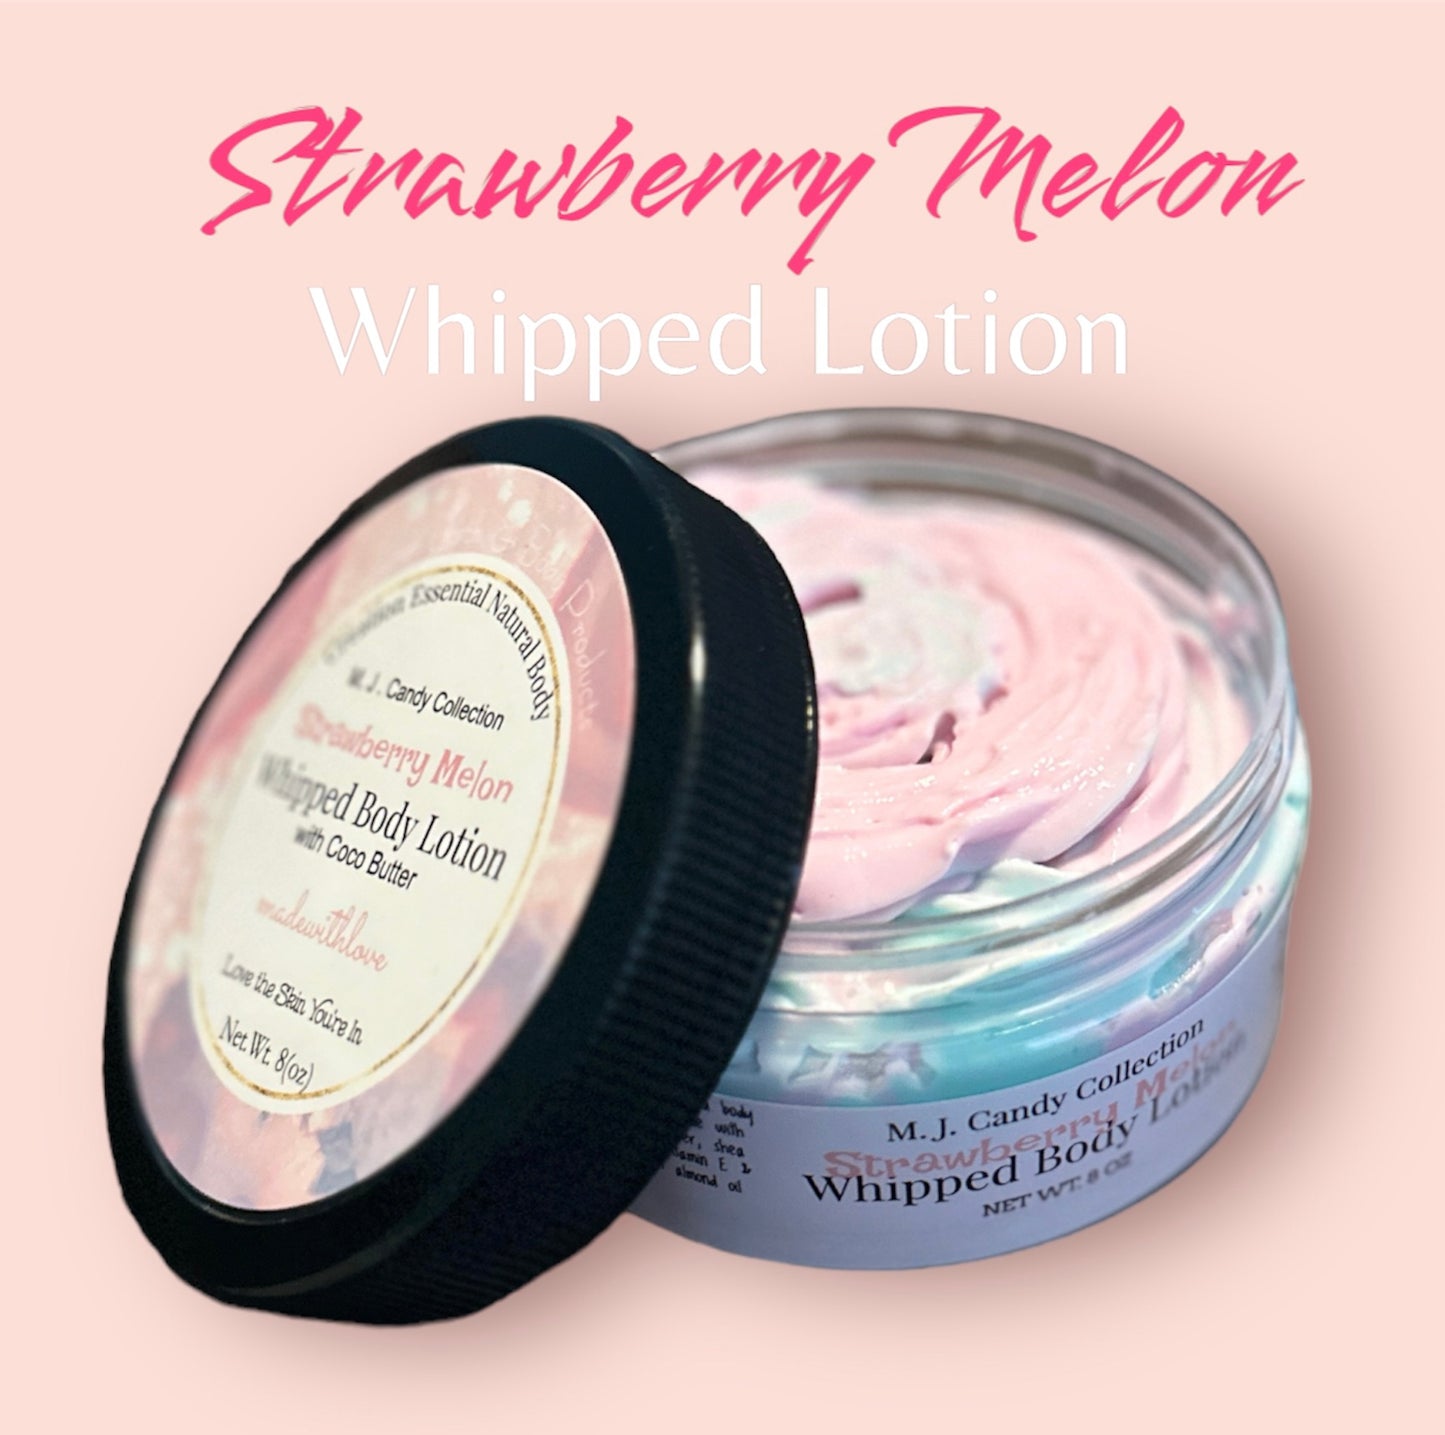 Strawberry Melon Whipped Lotion 8oz